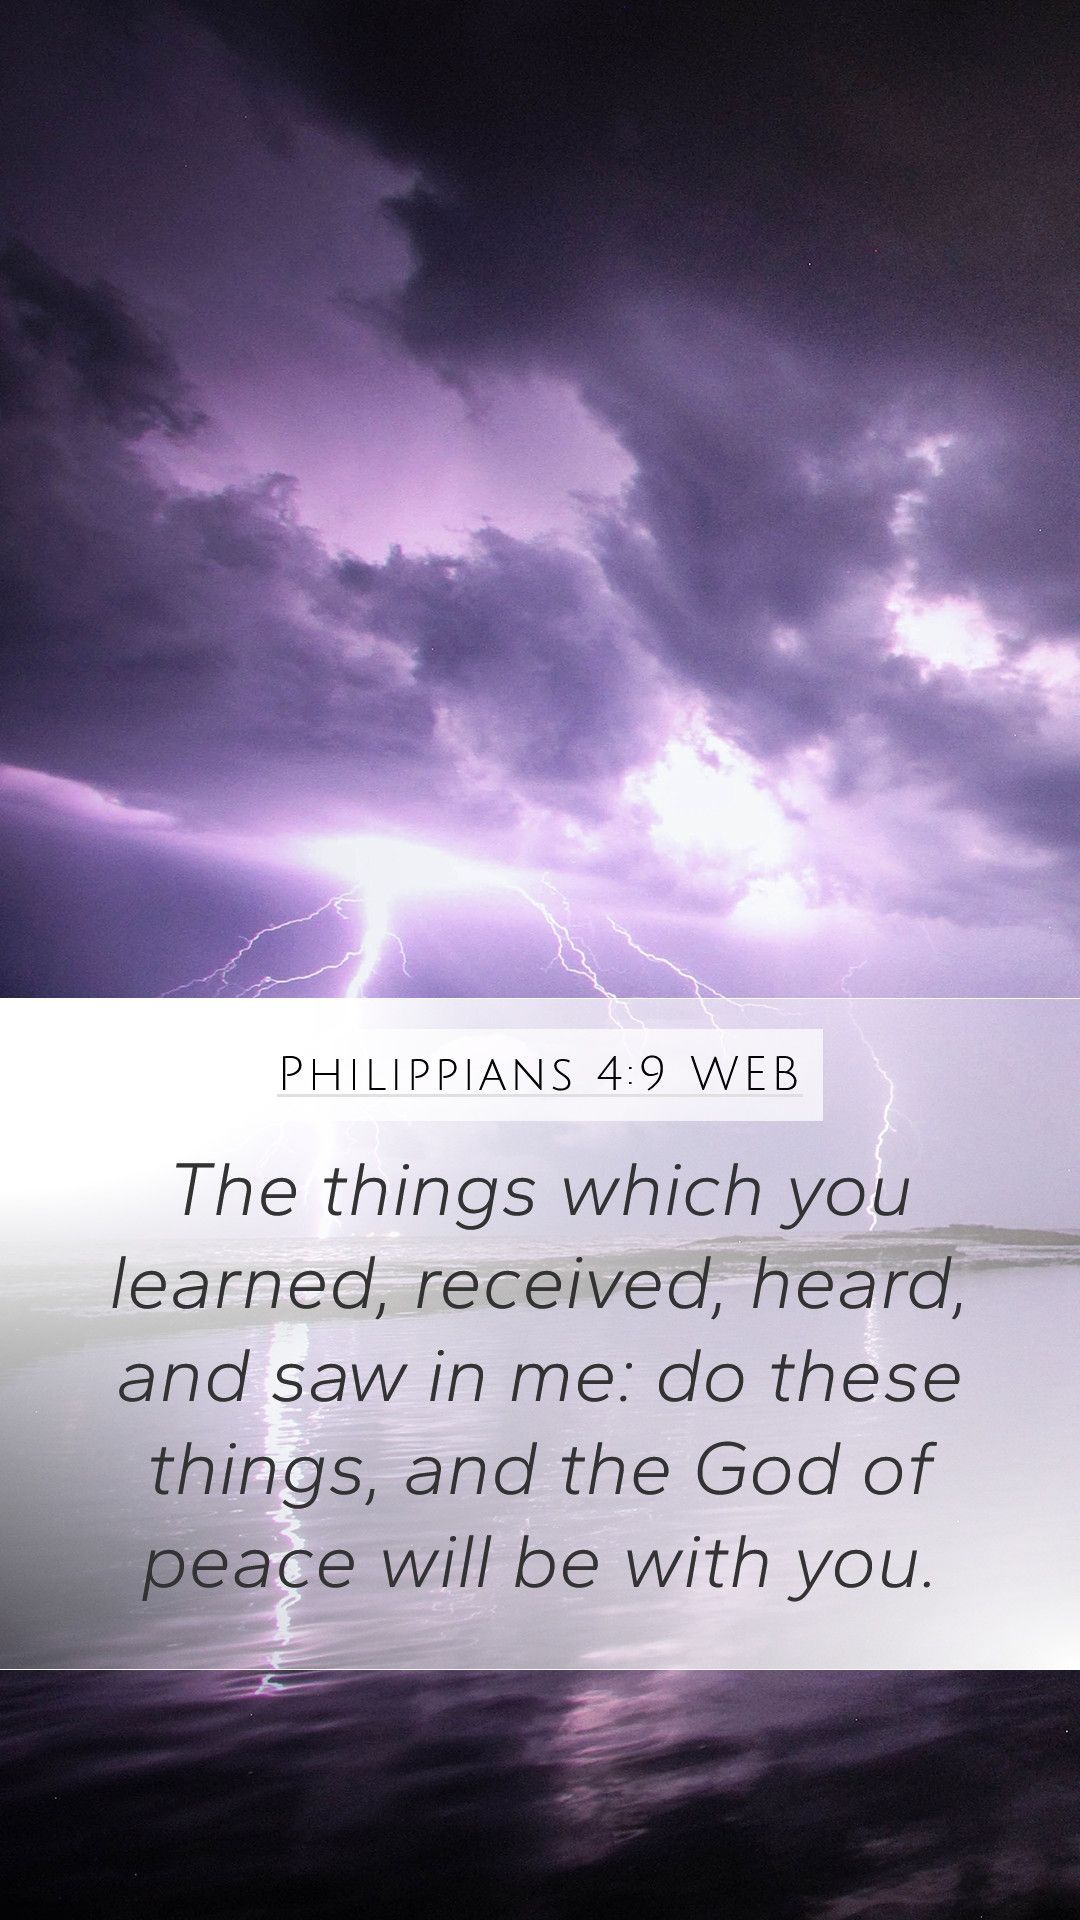 Philippians 4:9 WEB Mobile Phone Wallpaper things which you learned, received, heard